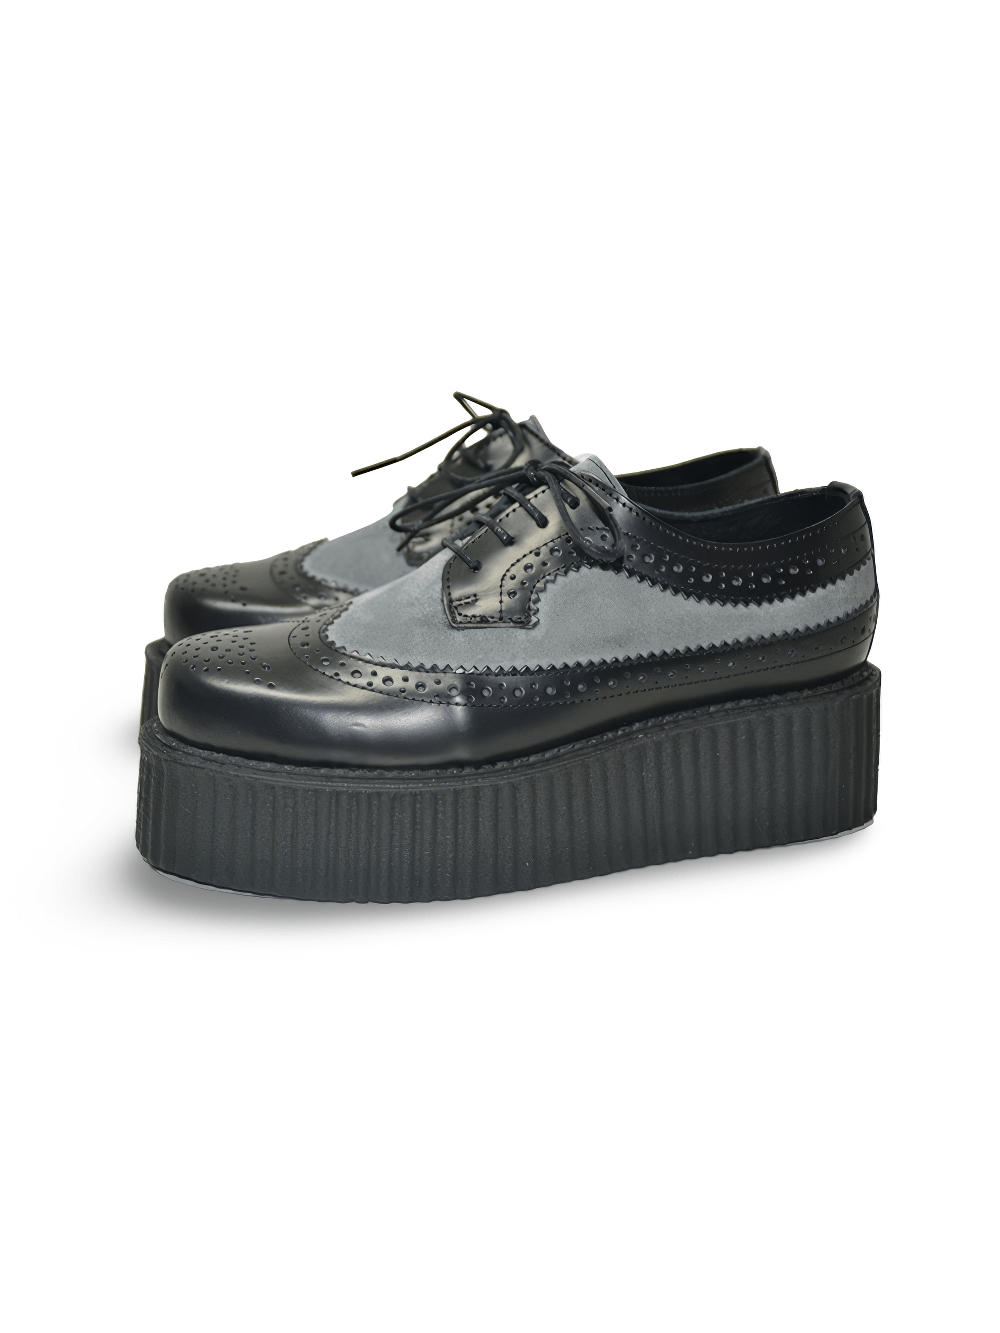 Unisex Black-Gray Suede Lace-Up Platform Creepers